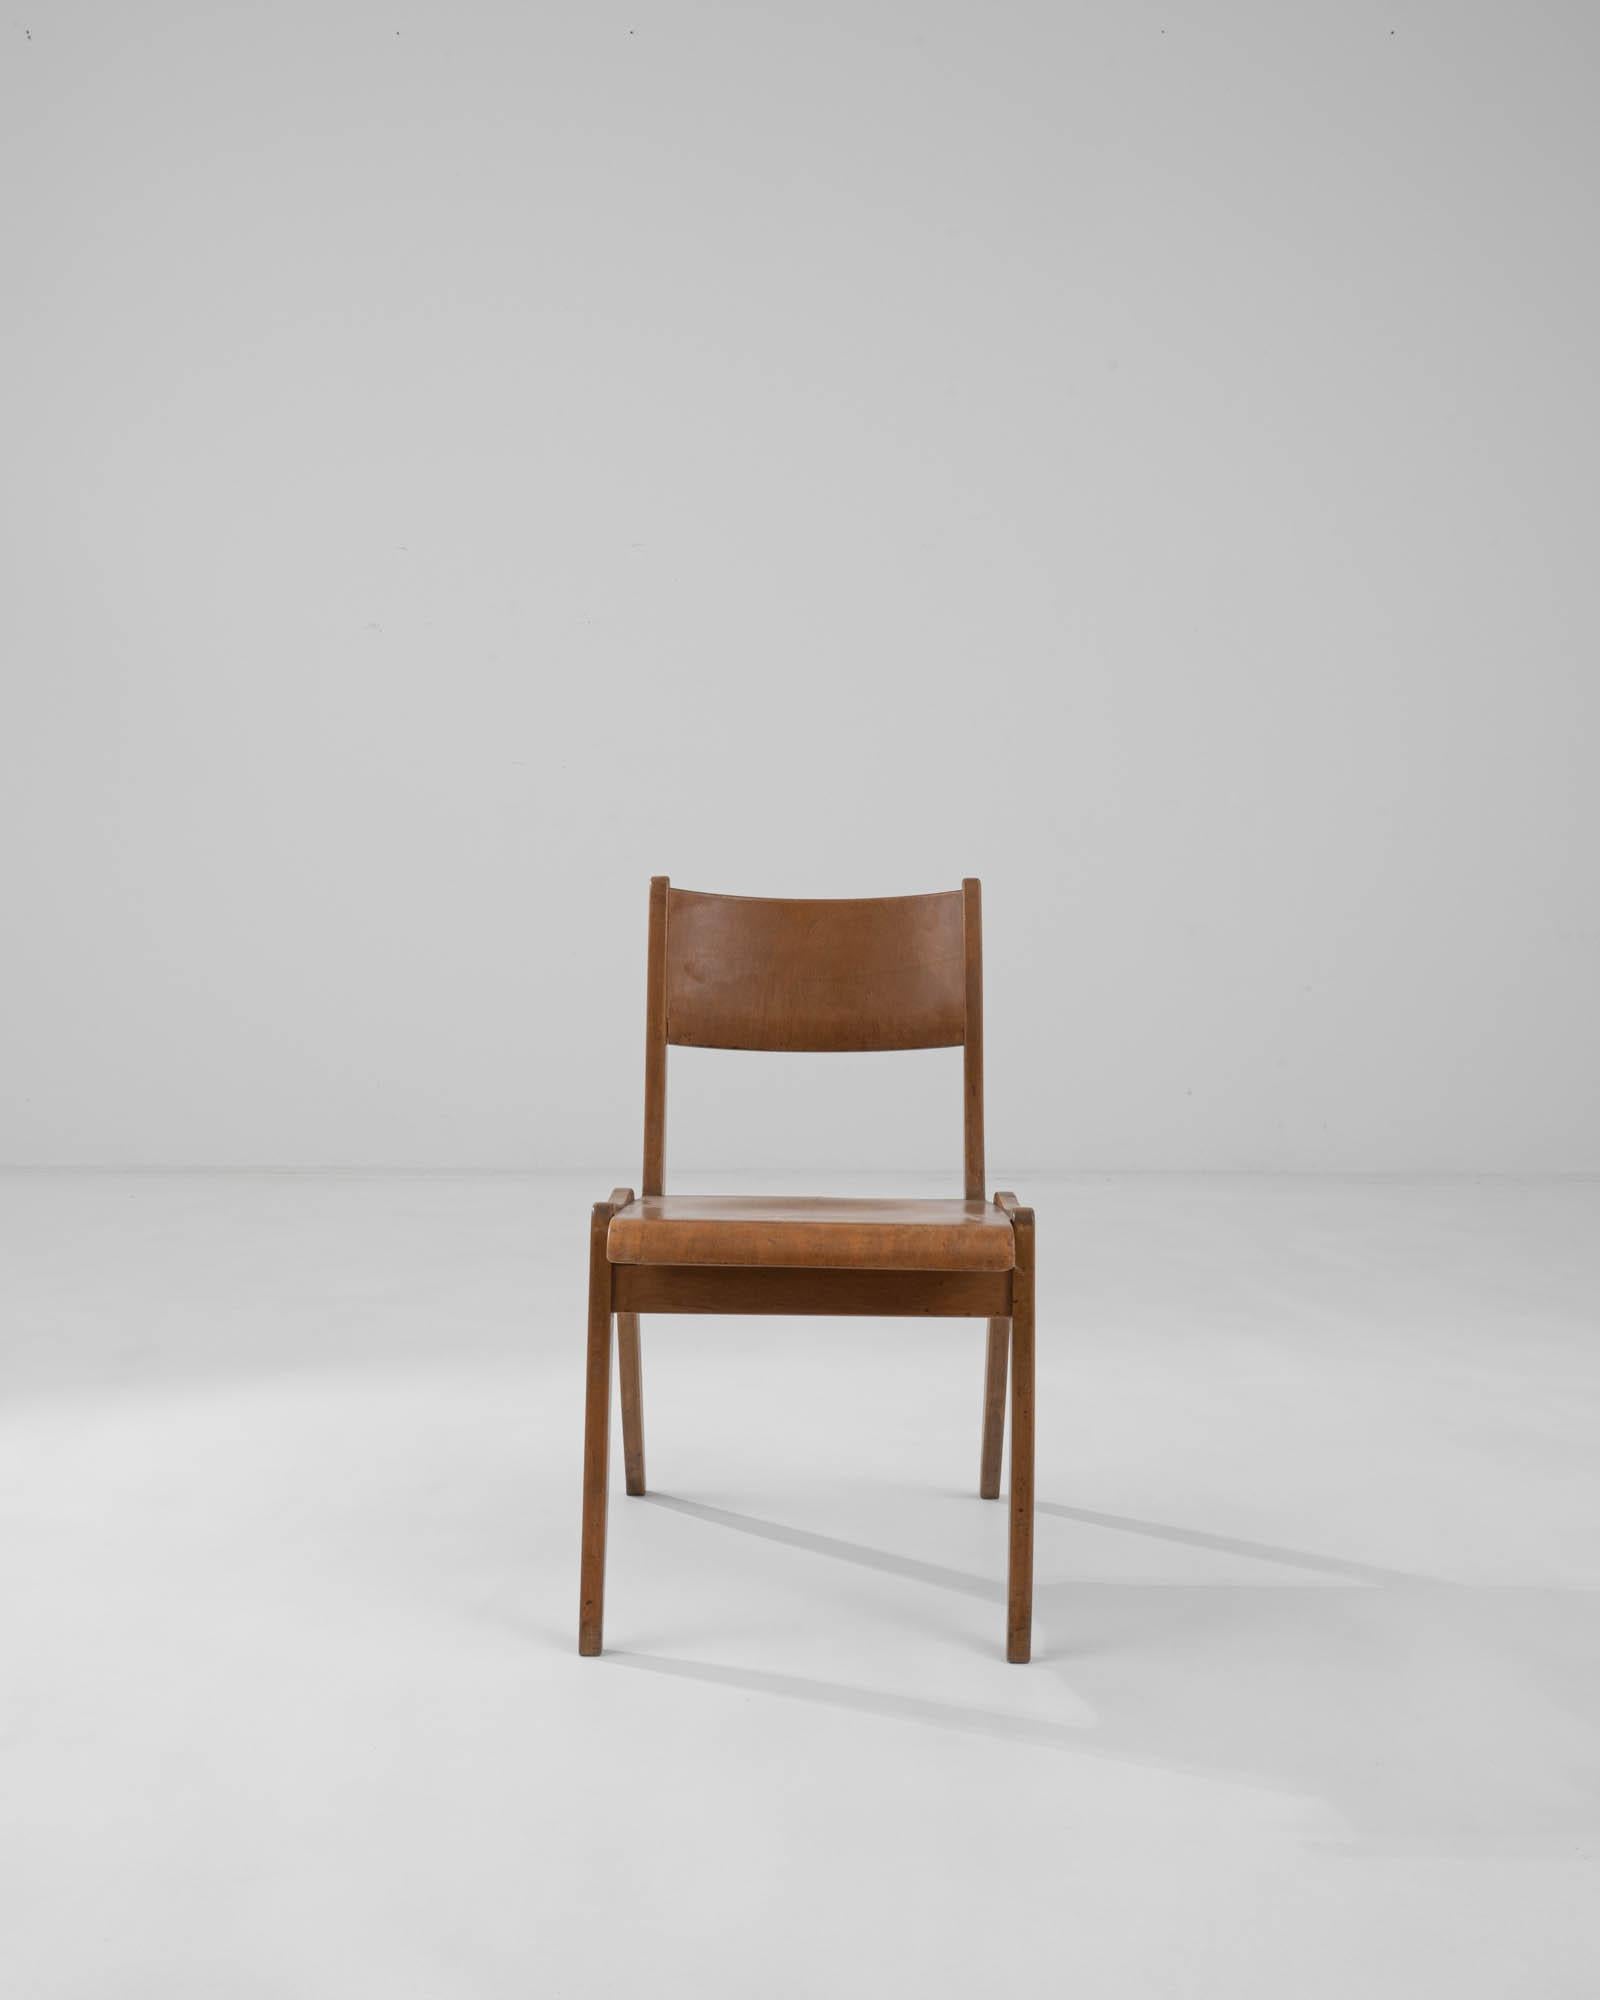 The simple yet striking form of this Modernist wooden dining chair cuts a stylish silhouette. Built in Germany in the 20th century, the clean slant of the A-frame legs is echoed in the reclined angle of the back rail, creating a graphic composition.